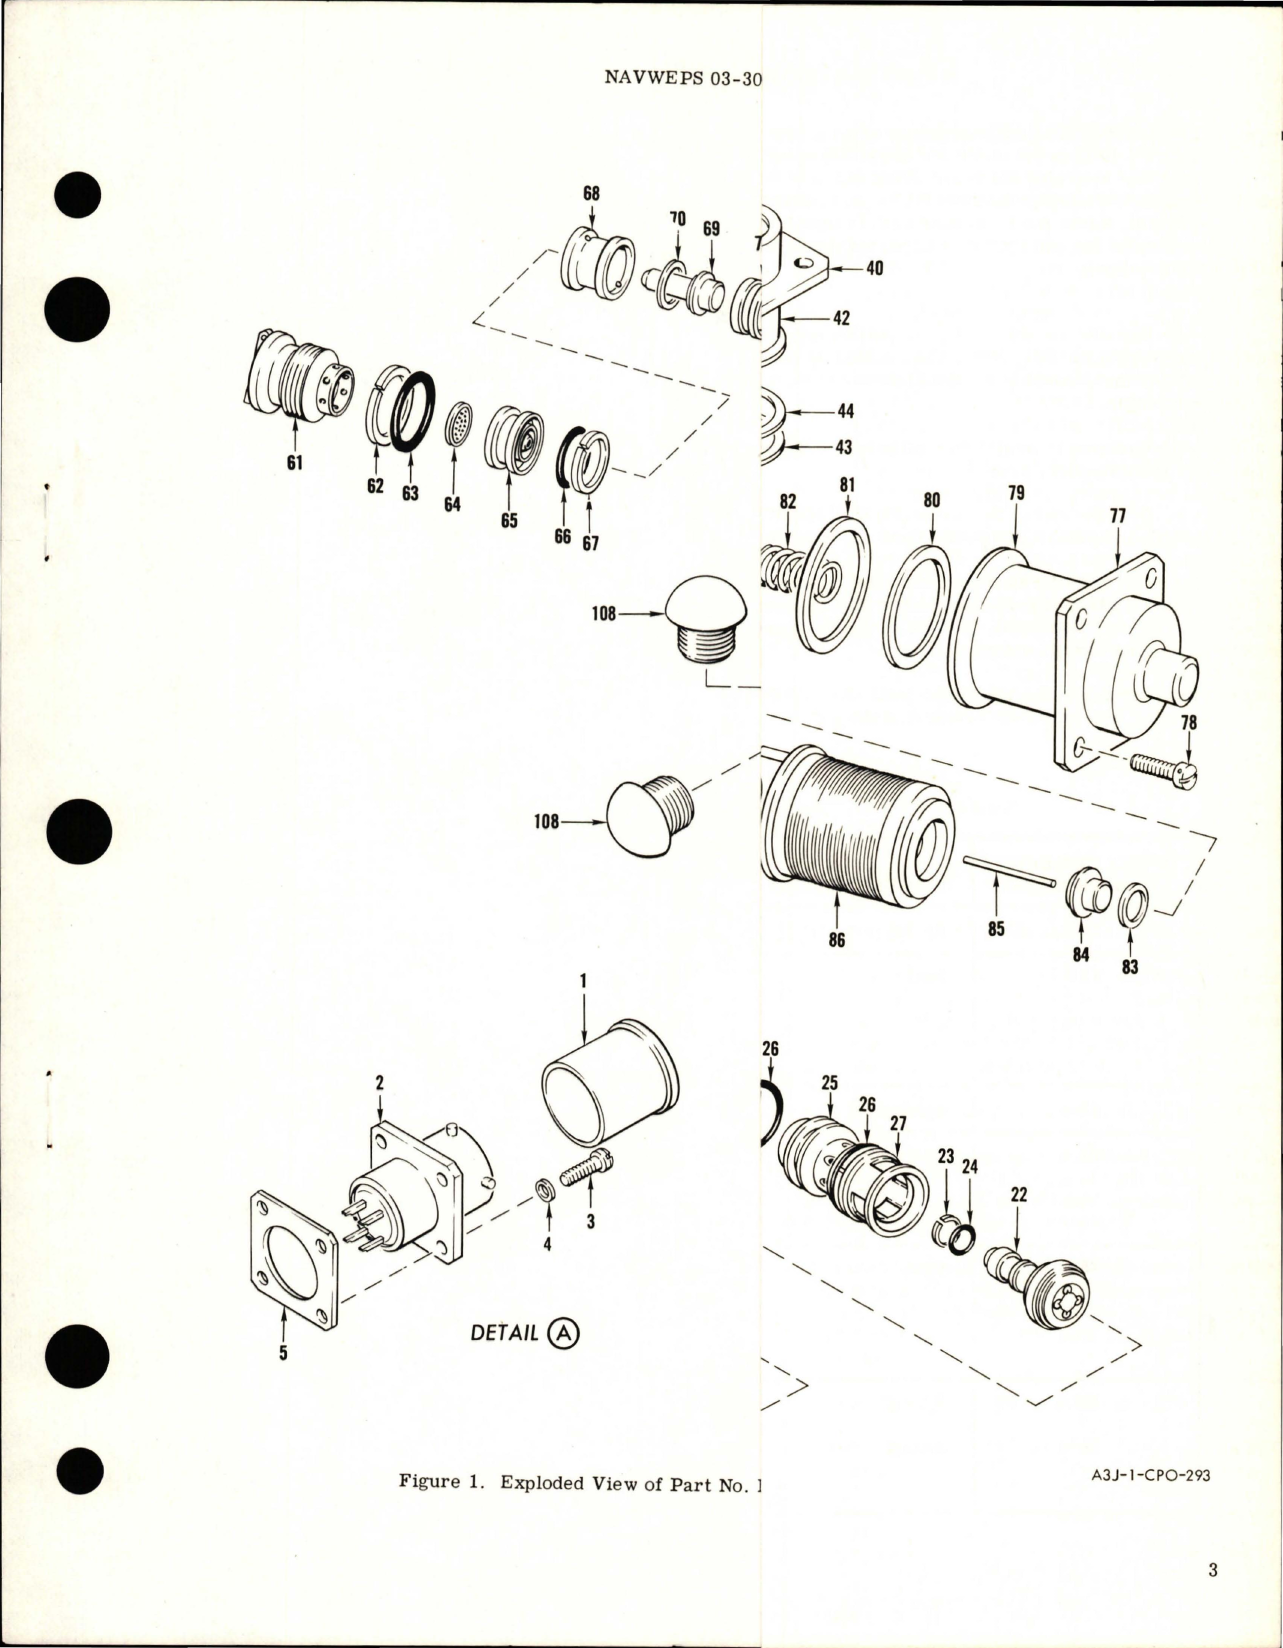 Sample page 5 from AirCorps Library document: Overhaul Instructions with Parts Breakdown for Control Valve - Part MC3637 